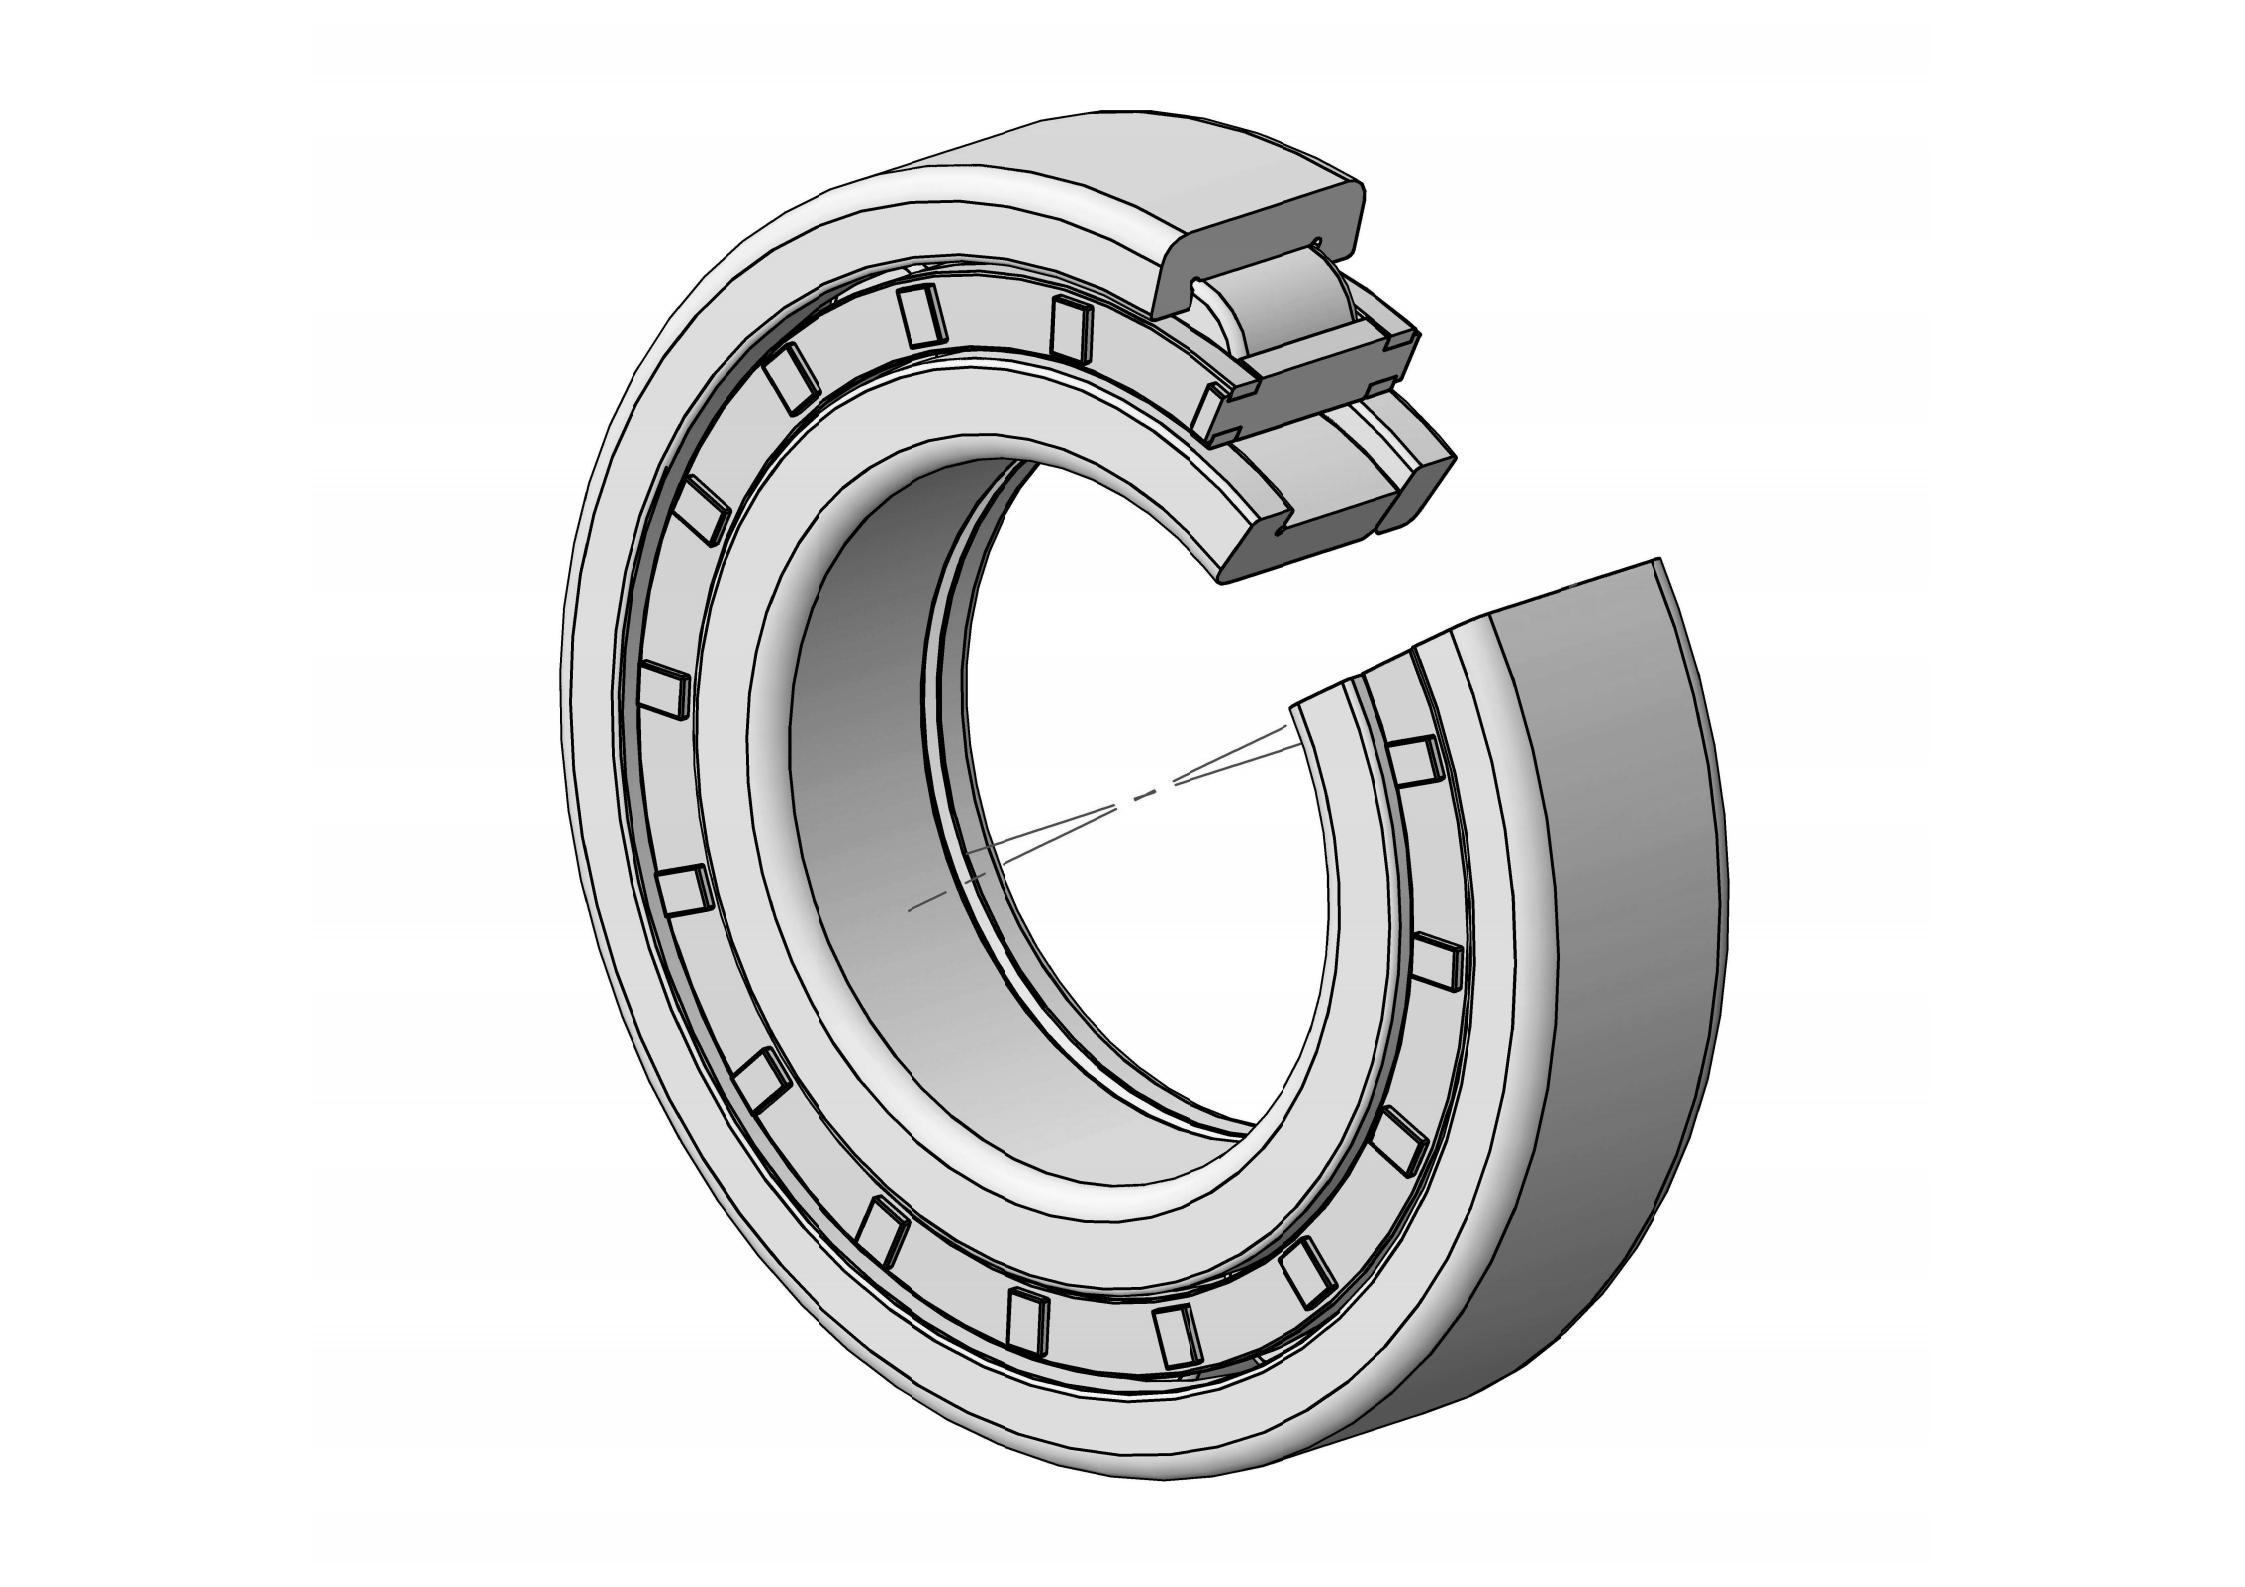 NUP2216-EM Single Row Cylindrical roller bearing 